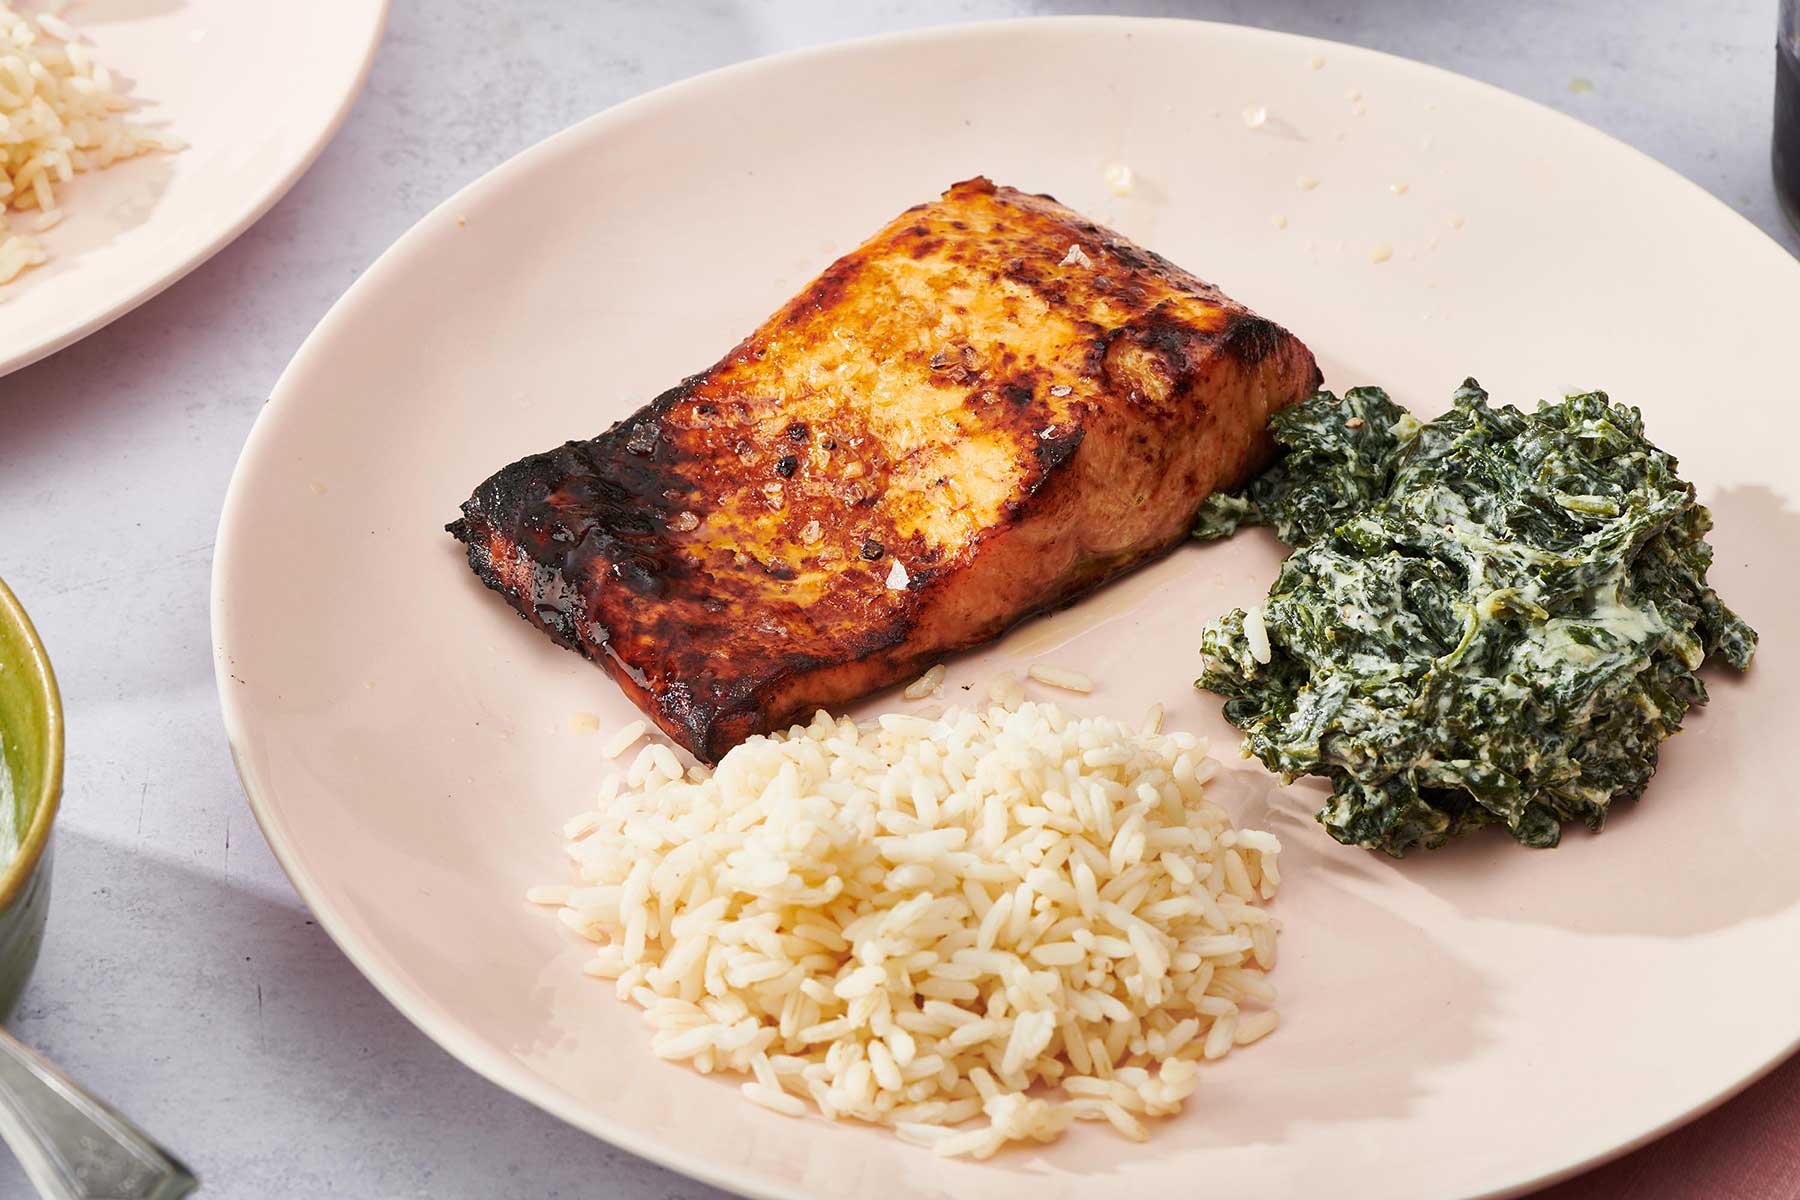 Salmon filet cooked in air fryer on plate with creamed greens and rice.